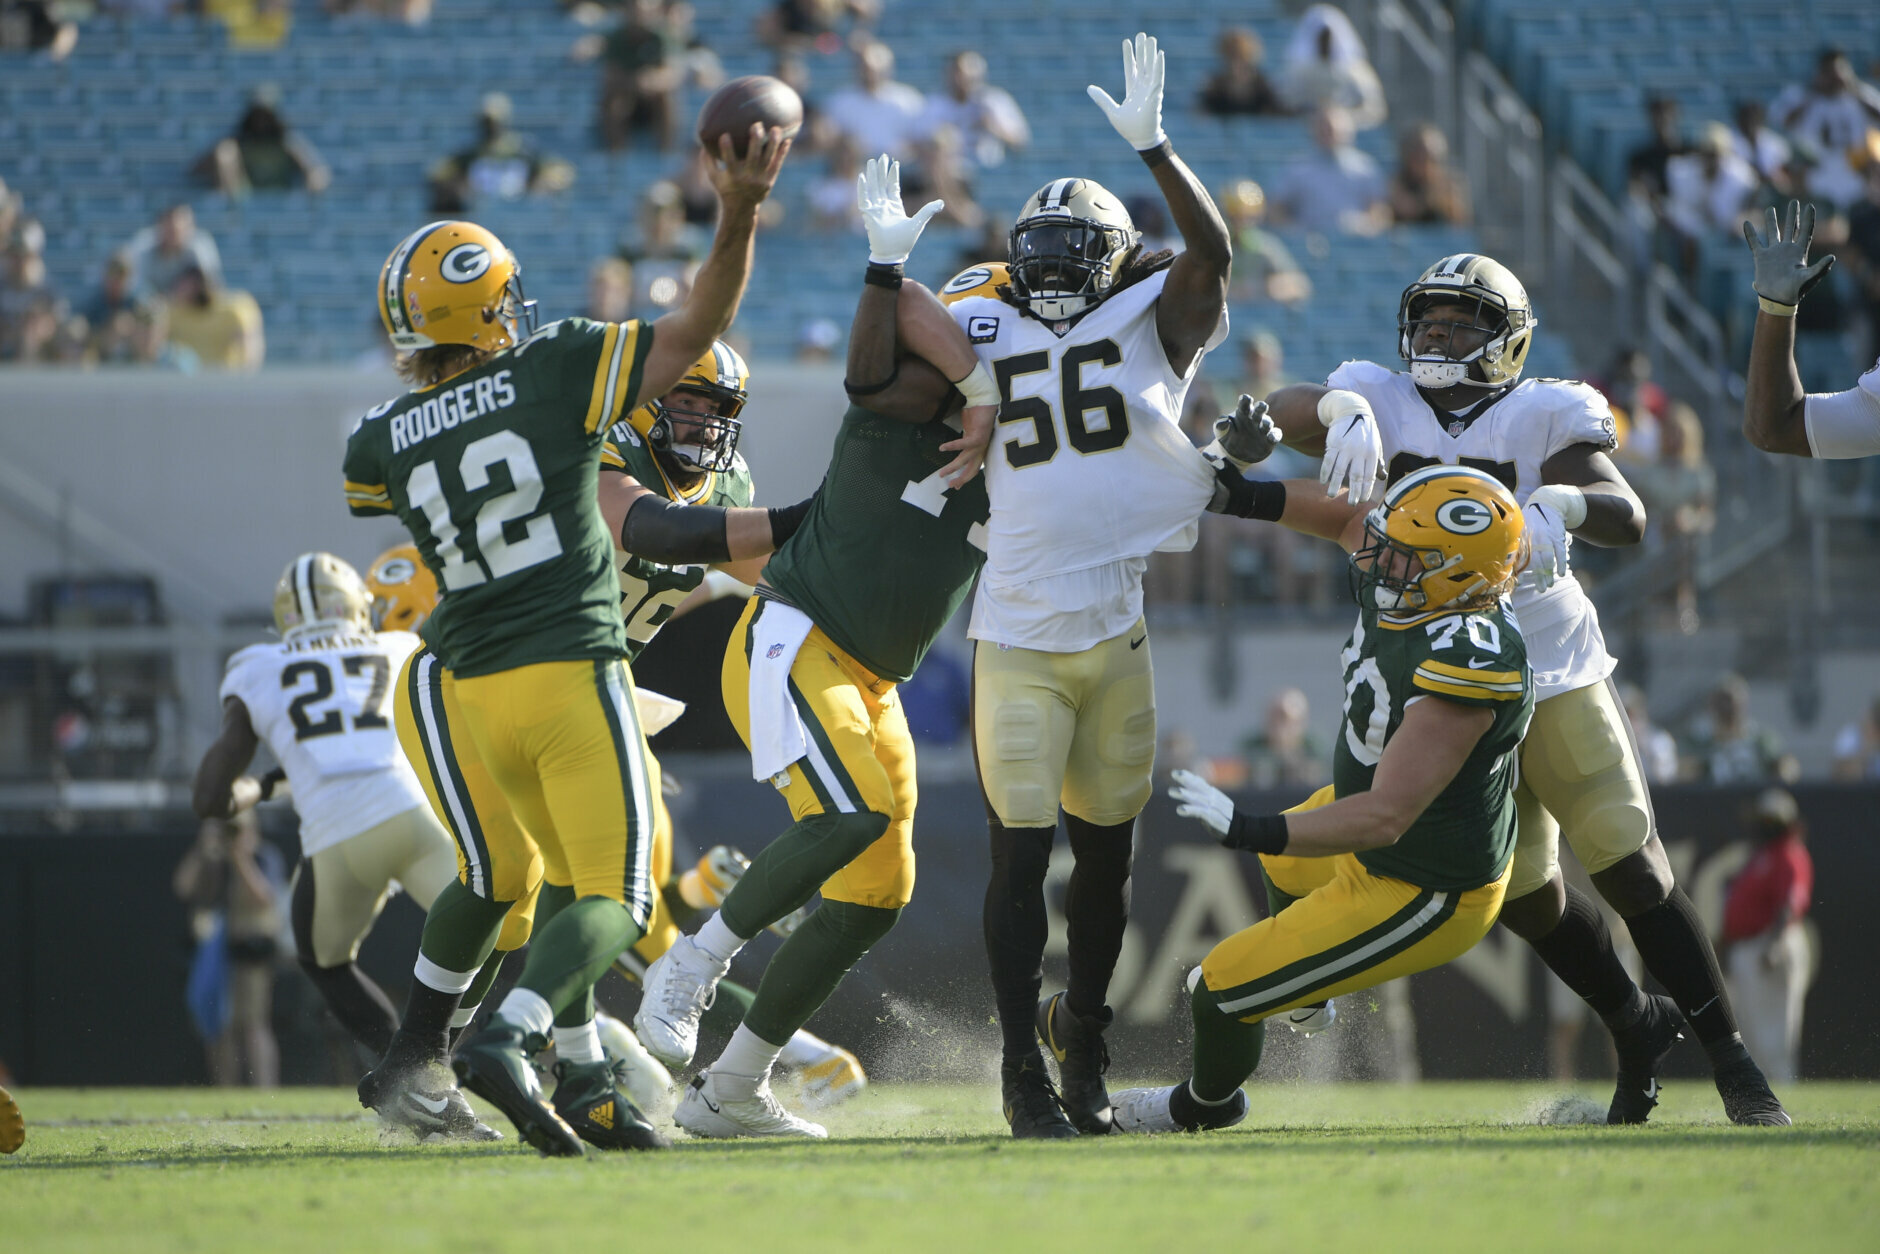 <p><b><i>Packers 3<br />
Saints 38</i></b></p>
<p>Jameis Winston did more than just represent New Orleans to the fullest in Jacksonville &#8212; dude threw five touchdowns on only 20 throws in his Saints debut, while the NO defense said no to Aaron Rodgers in the rudest way possible, notching as many takeaways as points allowed and dealing A-Rod his worst loss as a pro (no, seriously &#8230; <i><a href="https://twitter.com/PFF/status/1437181383428947971?s=20">the reigning MVP played worse than he would have if he weren&#8217;t trying at all</a></i>). This may just be the most stunning result of Week 1 and probably not the last &#8220;<a href="https://www.packers.com/news/kick-in-the-you-know-where-comes-early-for-packers" target="_blank" rel="noopener">kick in the you know where</a>&#8221; for the Packers this year.</p>
